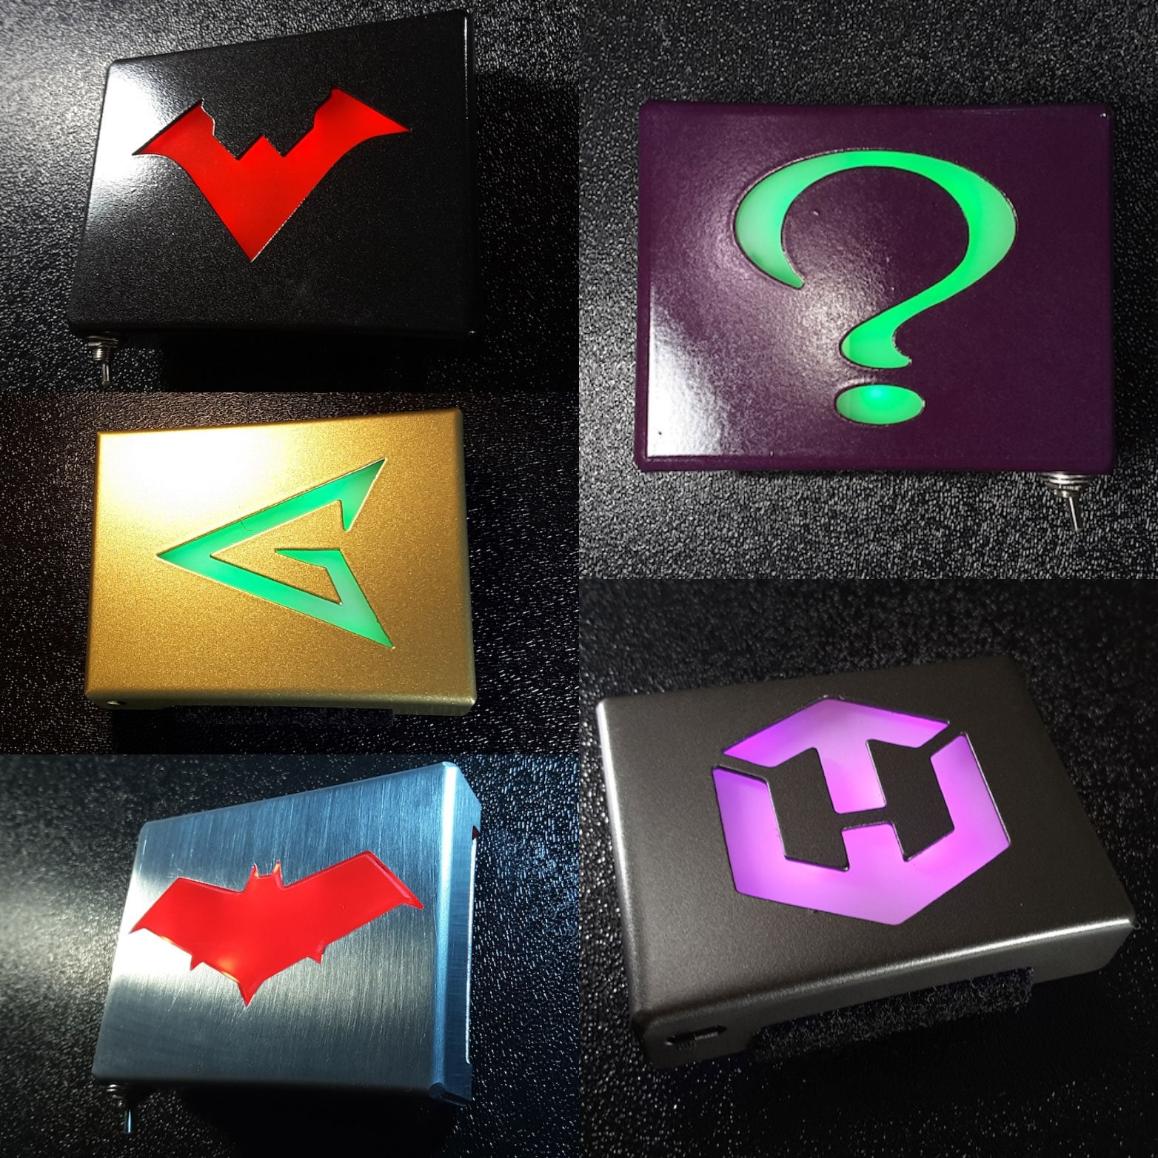 Various glowing metal belt buckles with different symbols